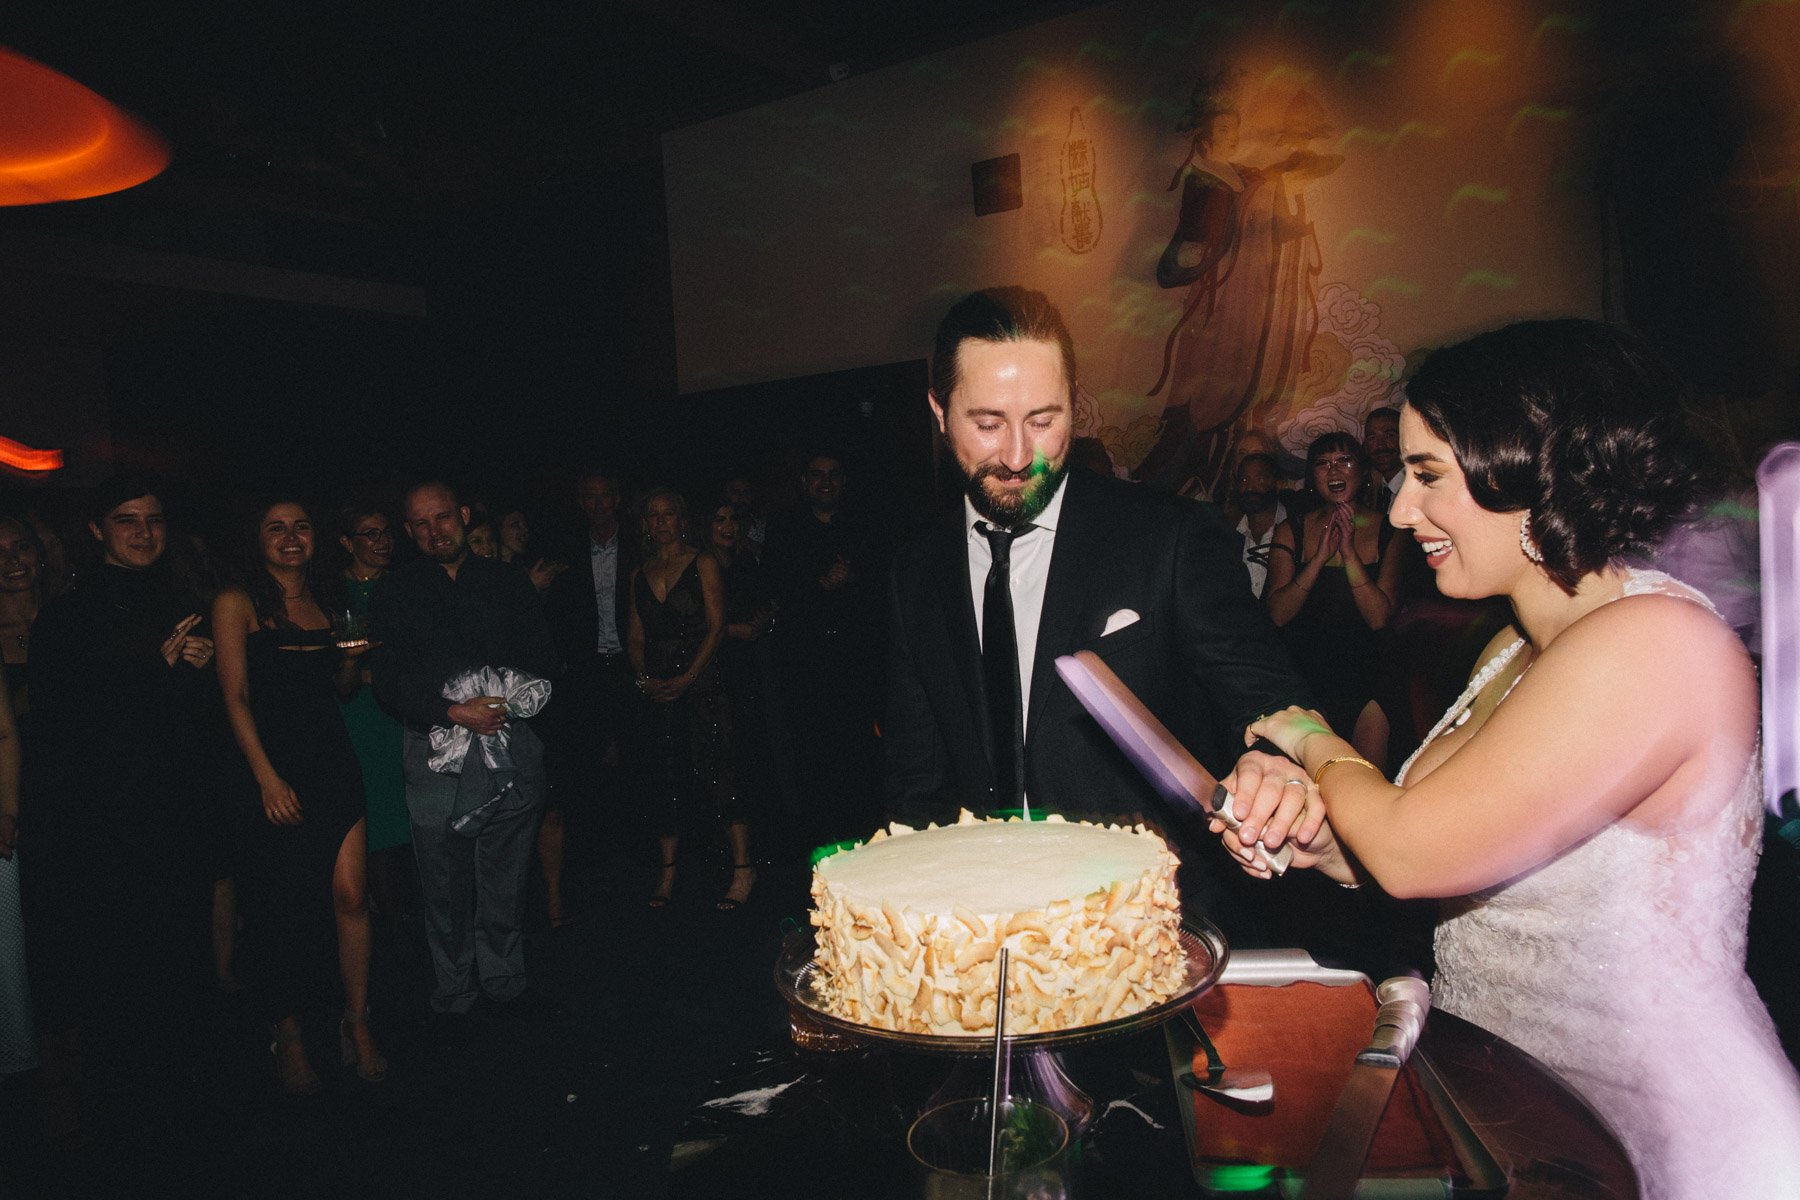 A bride and groom cutting their cake at Moongate Lounge